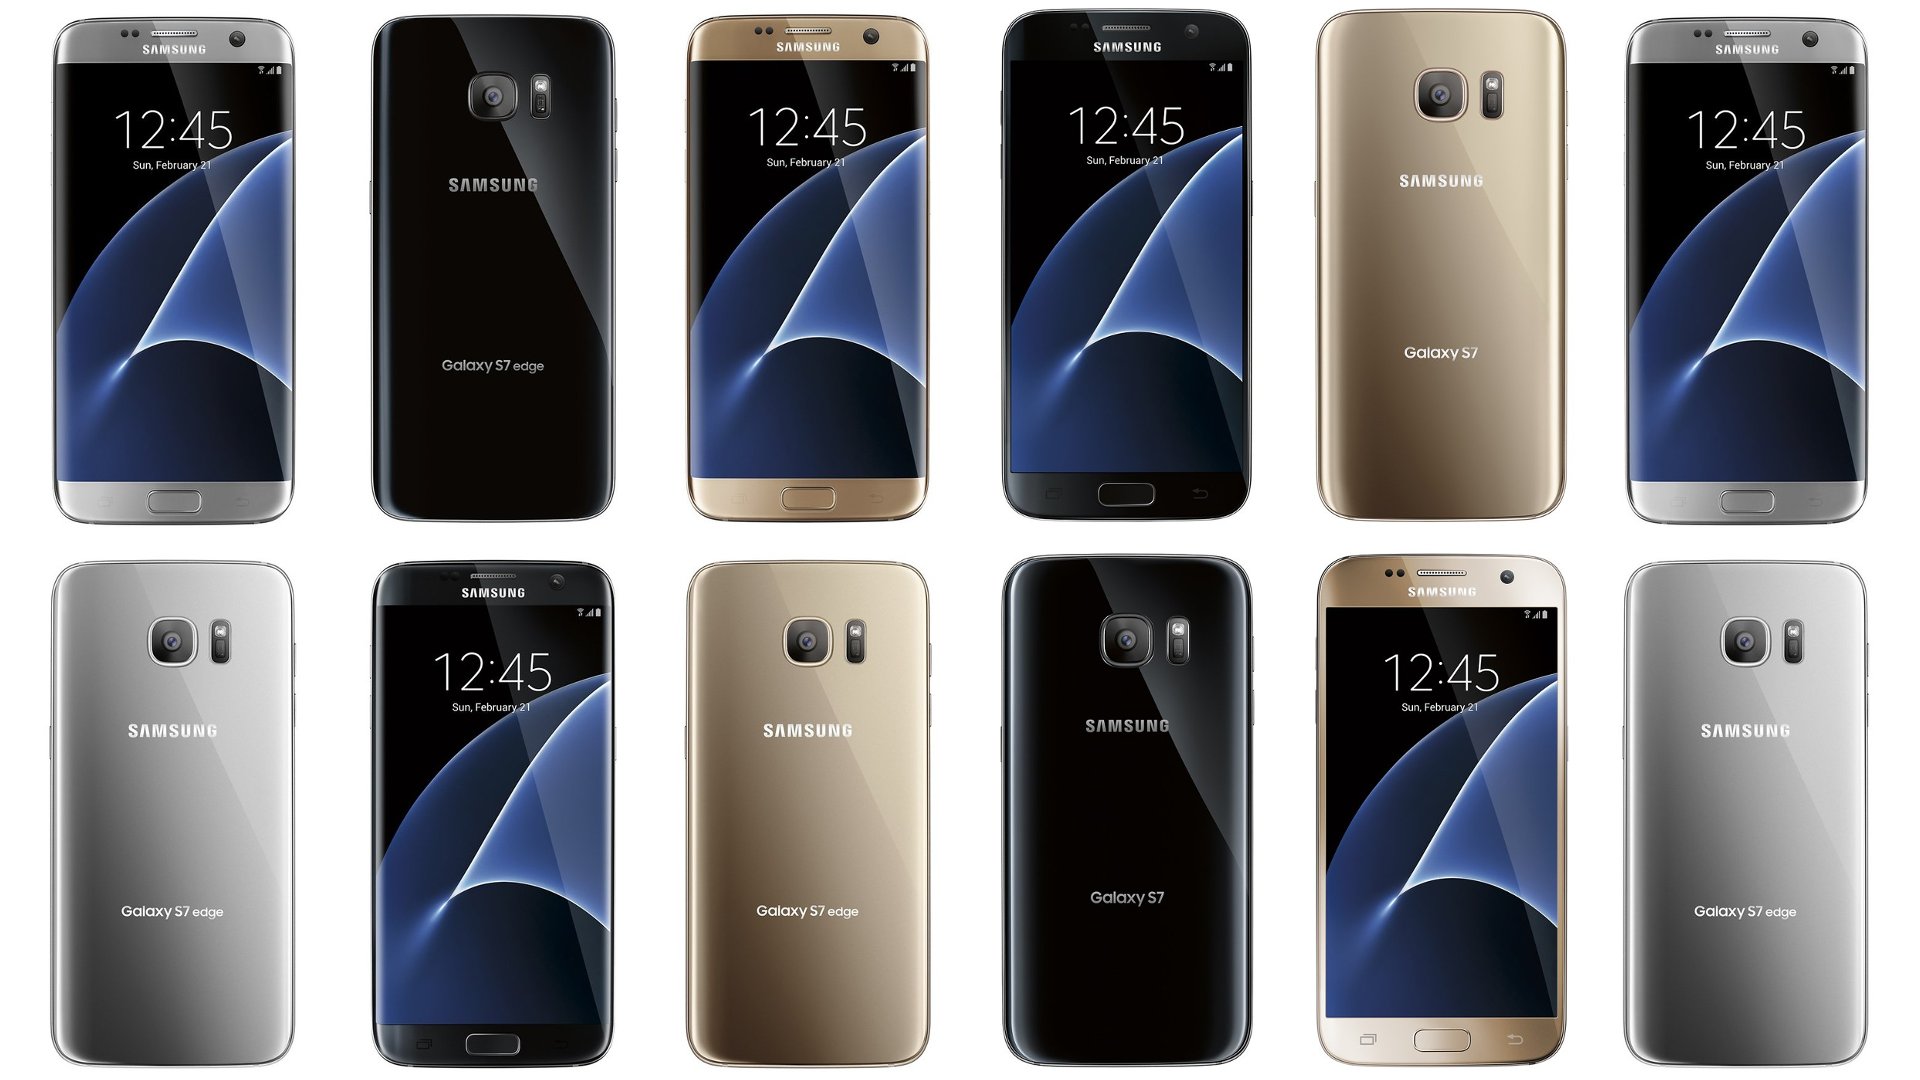 Samsung Galaxy S7 And Galaxy S7 Edge Leaked Renders Reveal Color Options